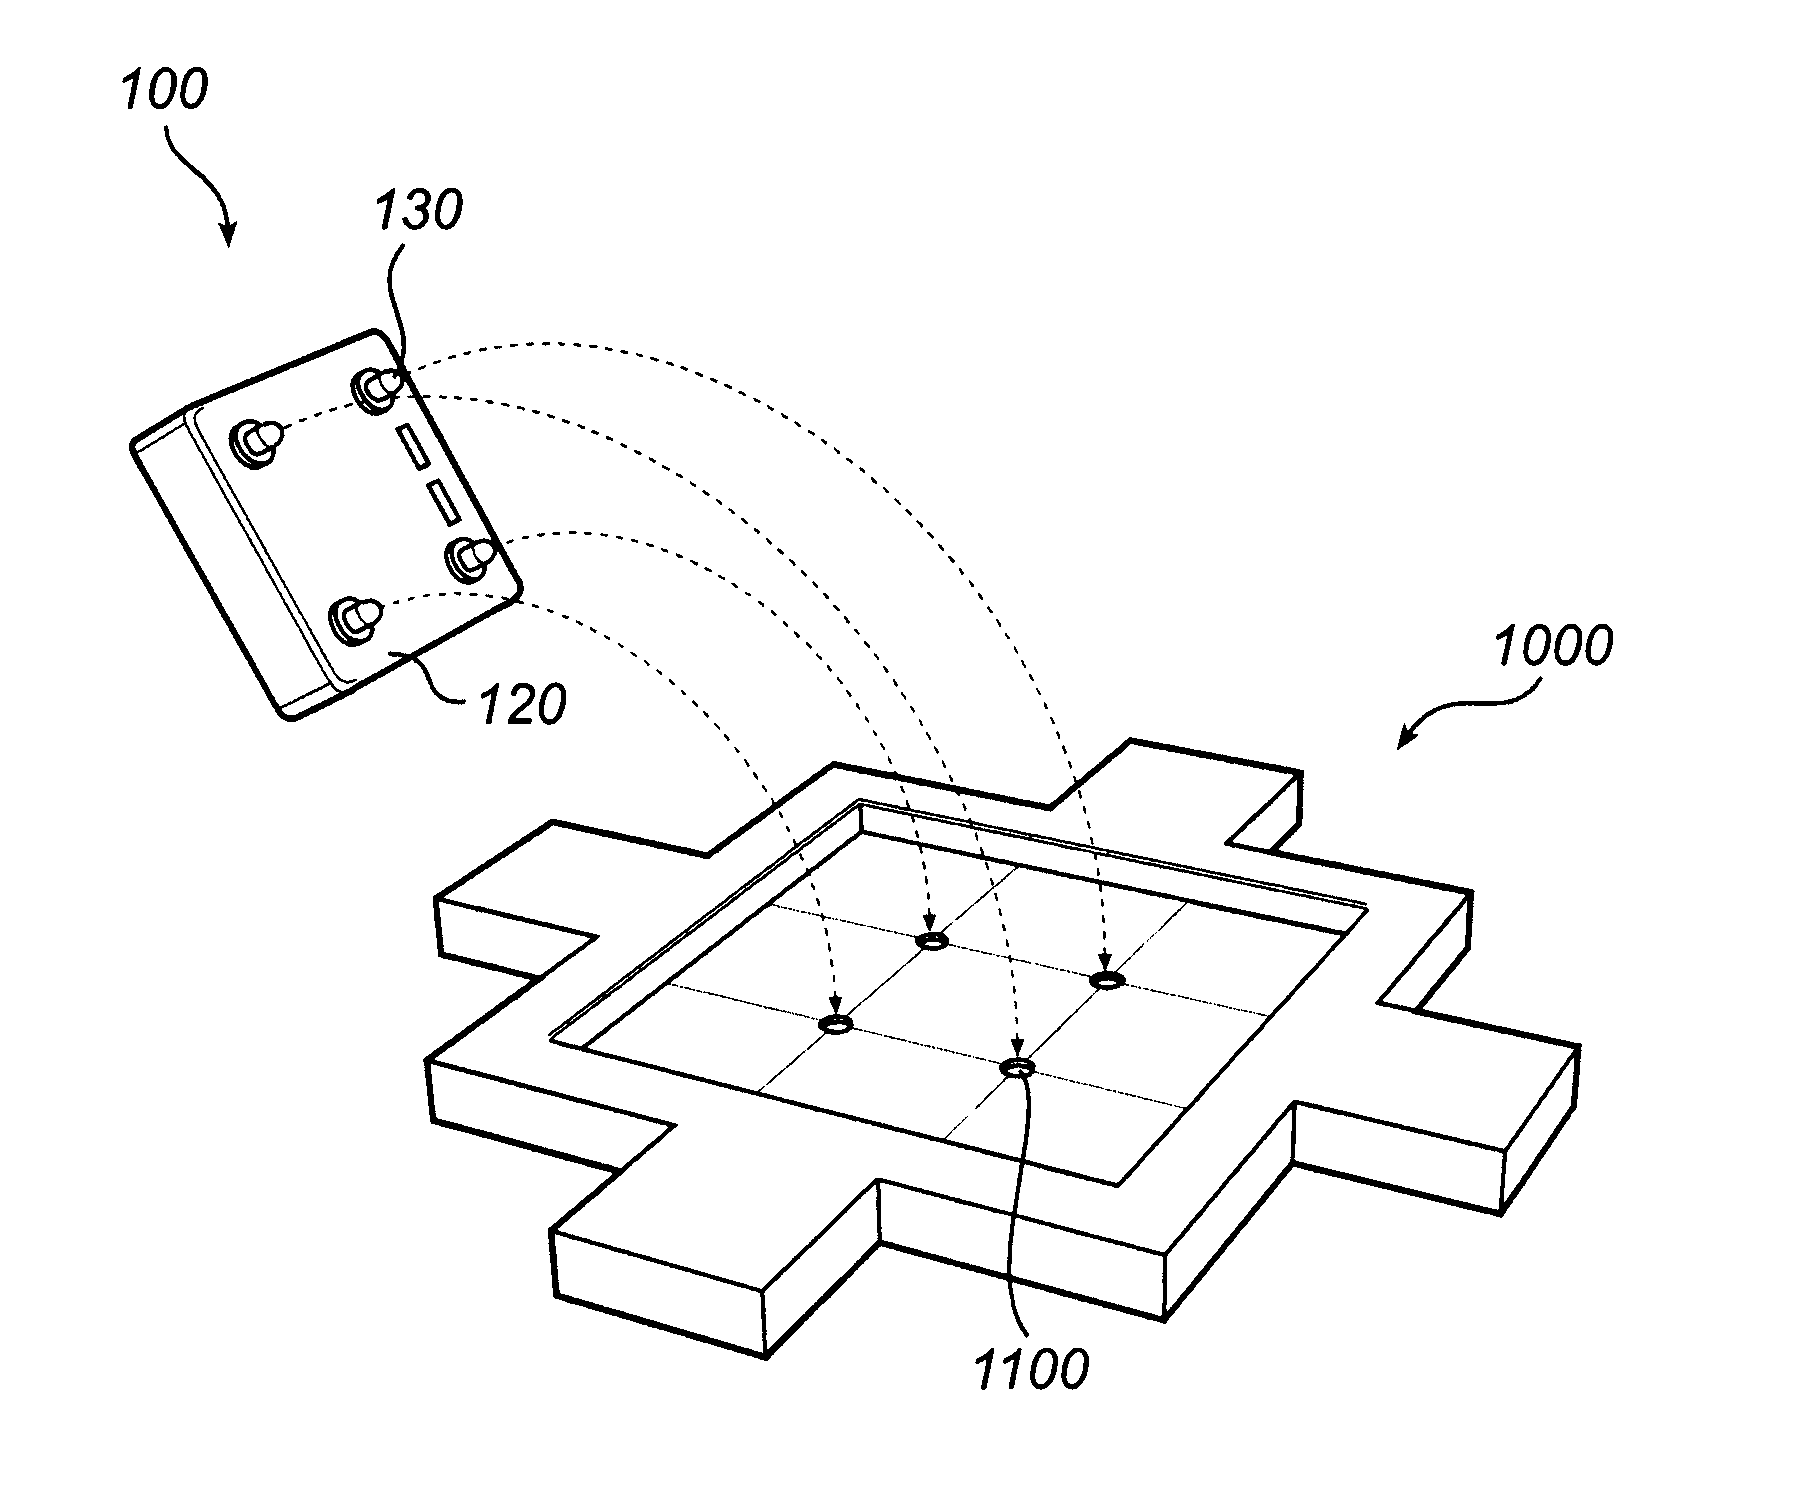 Control device for controlling a lighting effect